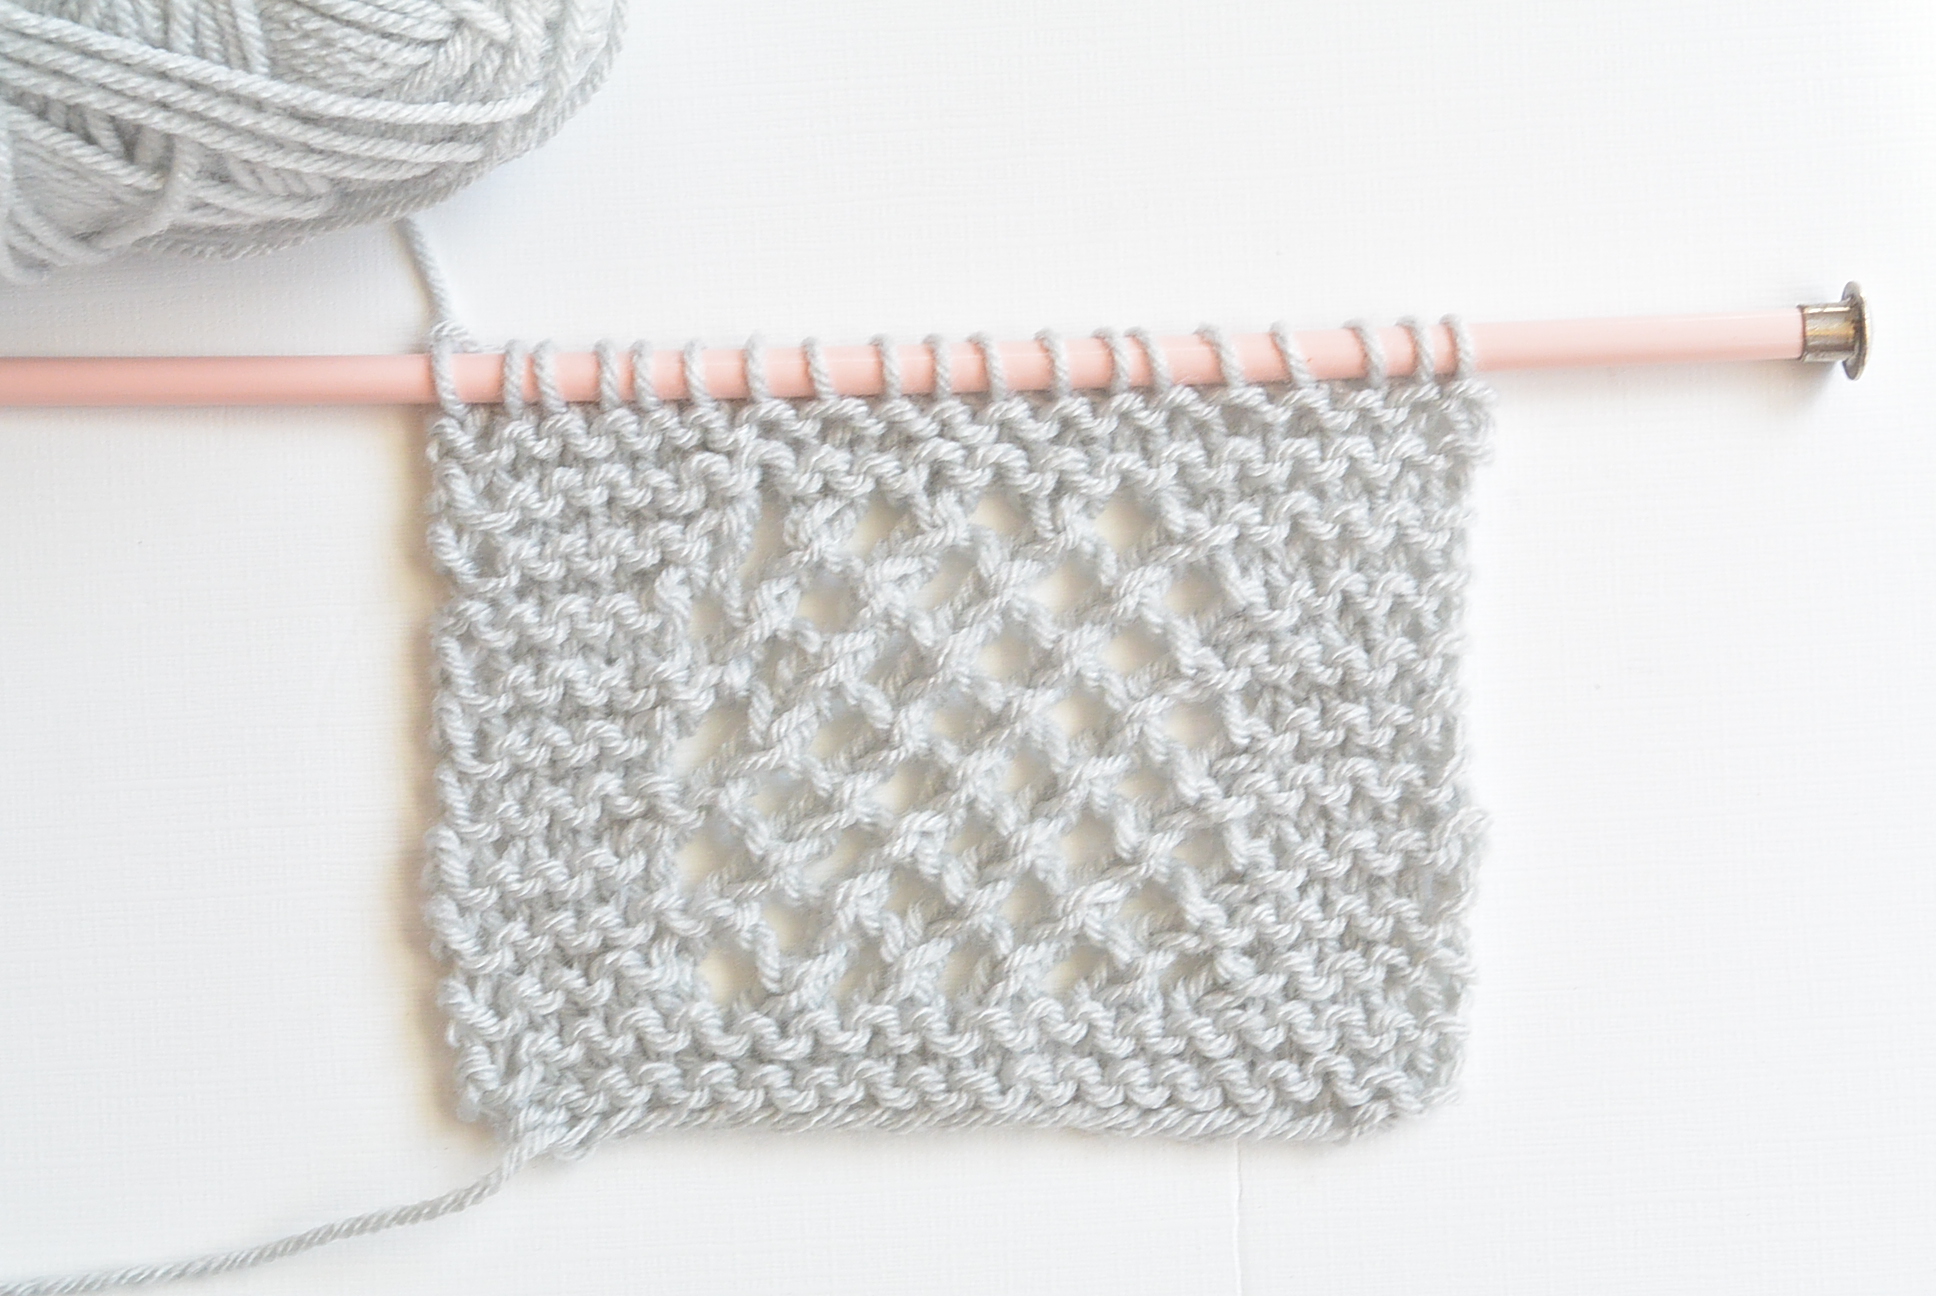 Two-row repeat Mesh stitch knitting pattern (super easy!)